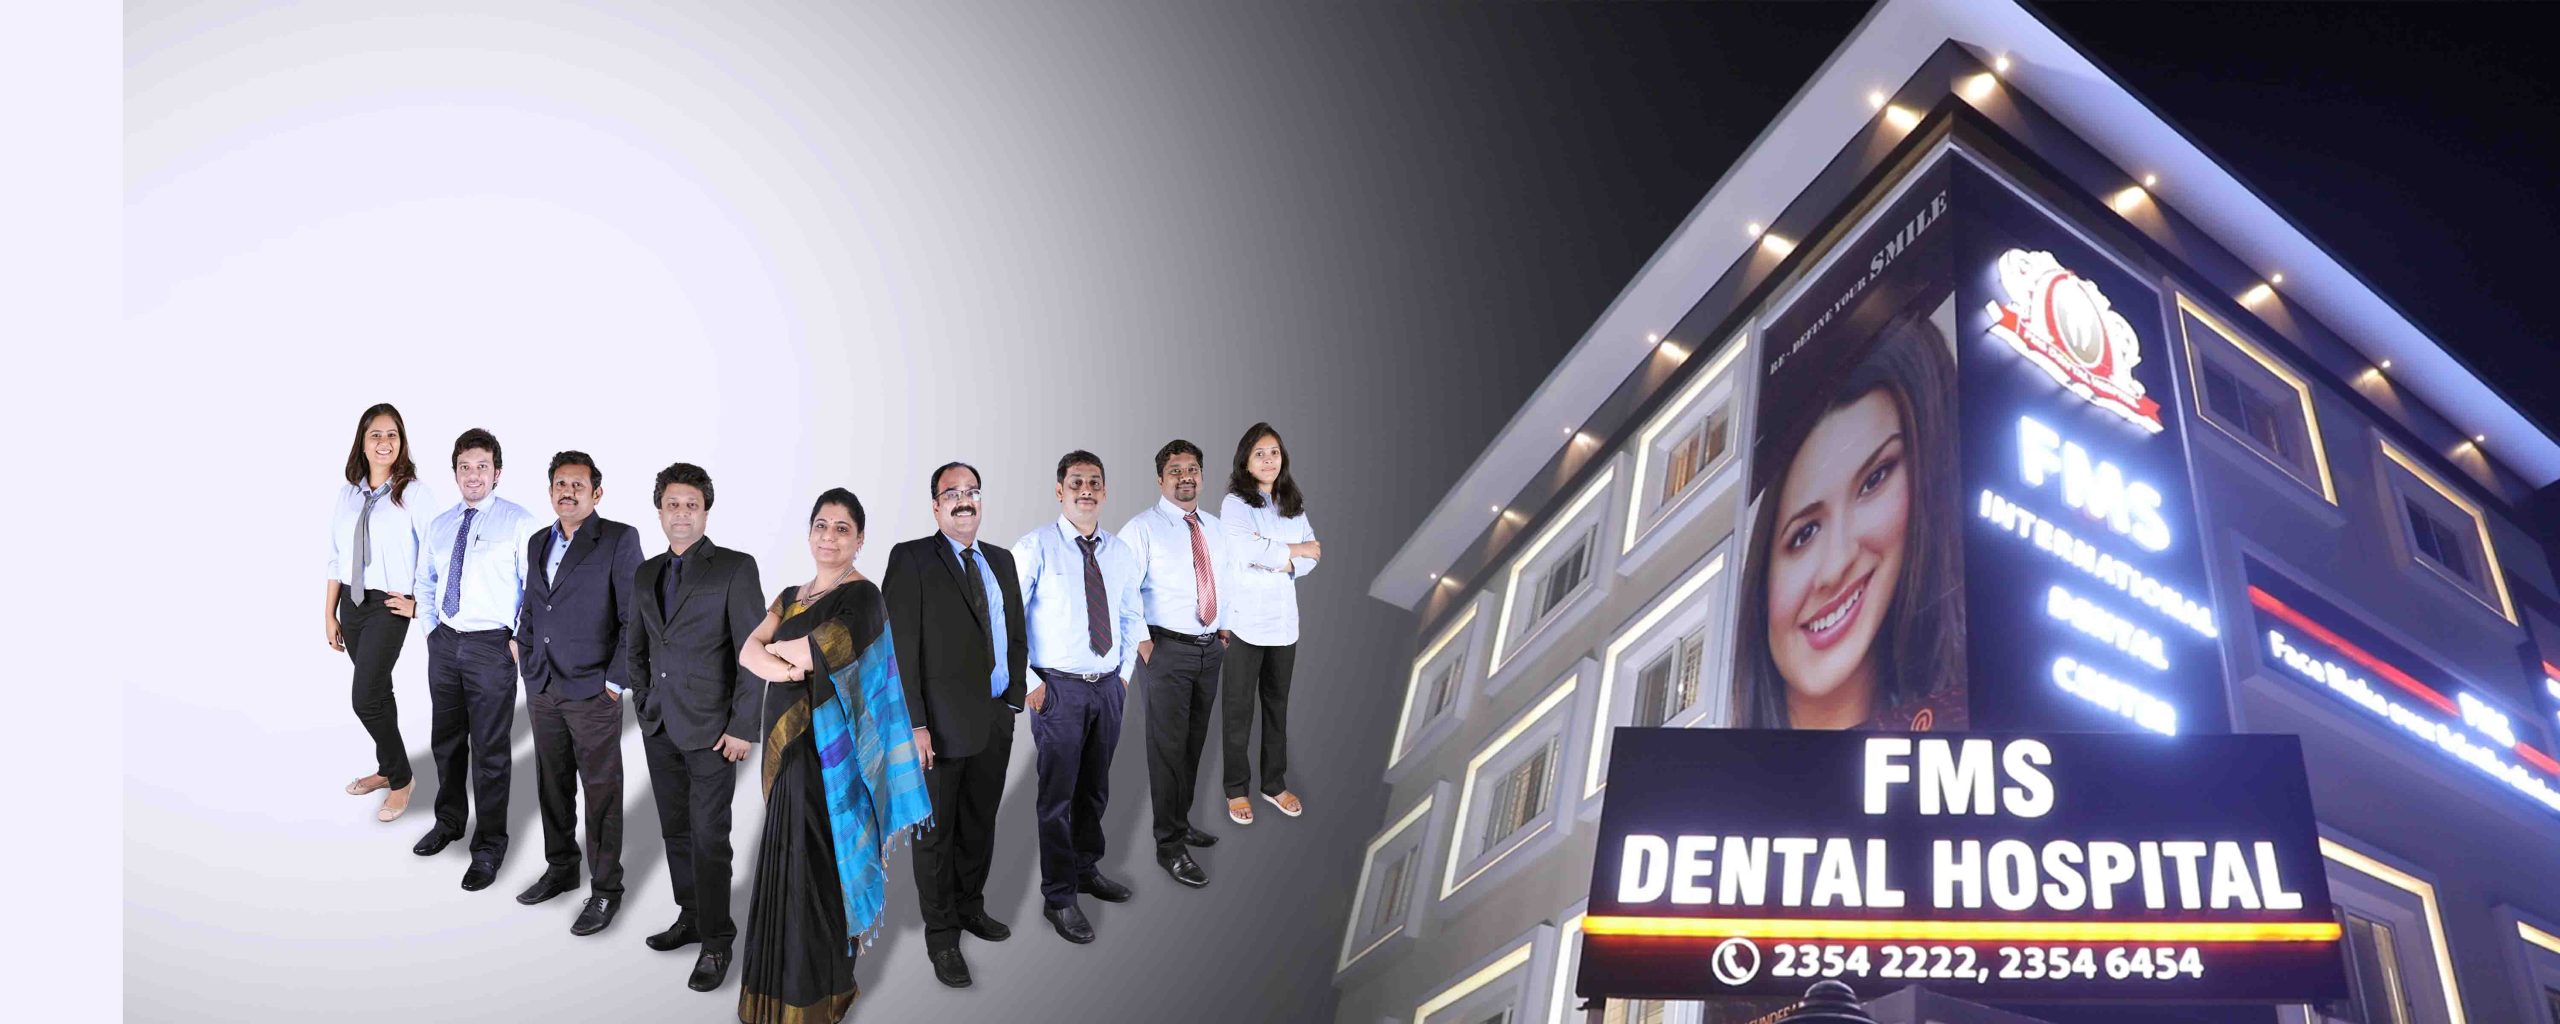 SSCDS GUIDE in synergy with FMS Dental